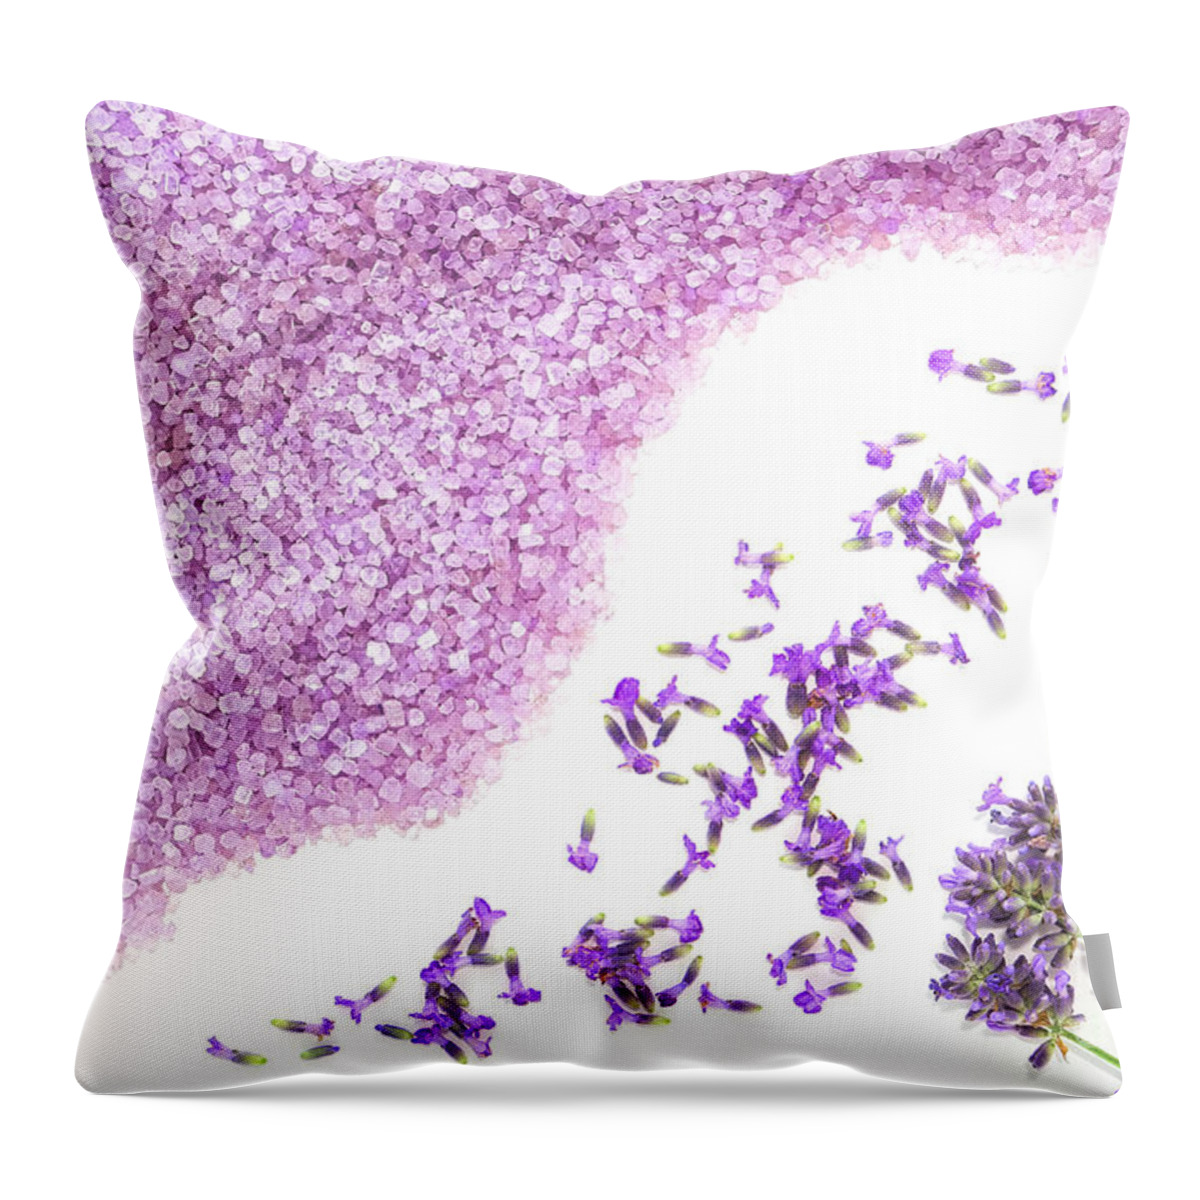 Lavender Throw Pillow featuring the photograph Lavender Art by Olivier Le Queinec